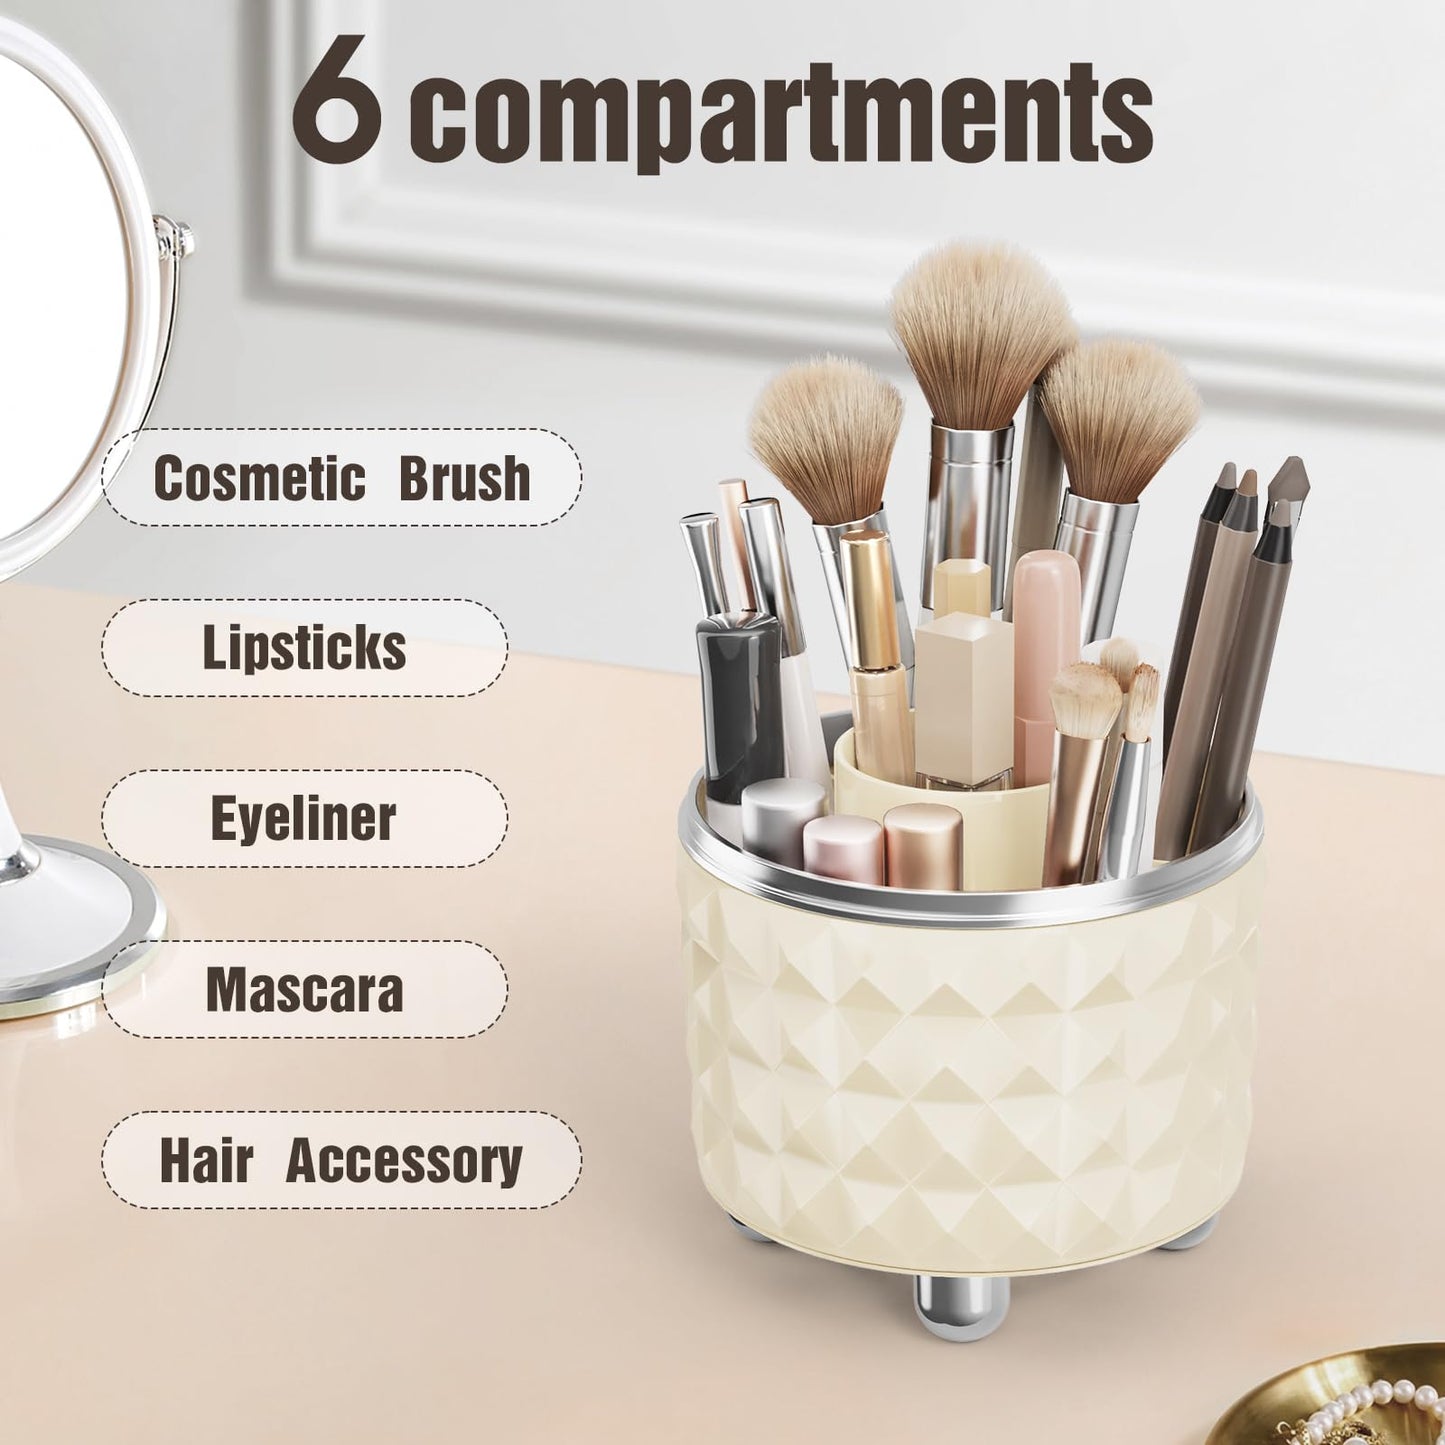 Rosoenvi Makeup Brush Holder Organizer, 360° Rotating Dustproof Makeup Brushes Organizer for Vanity, 6 Compartment Make Up Brushes Cup with Lid for Countertop Organization, Skincare, Beige